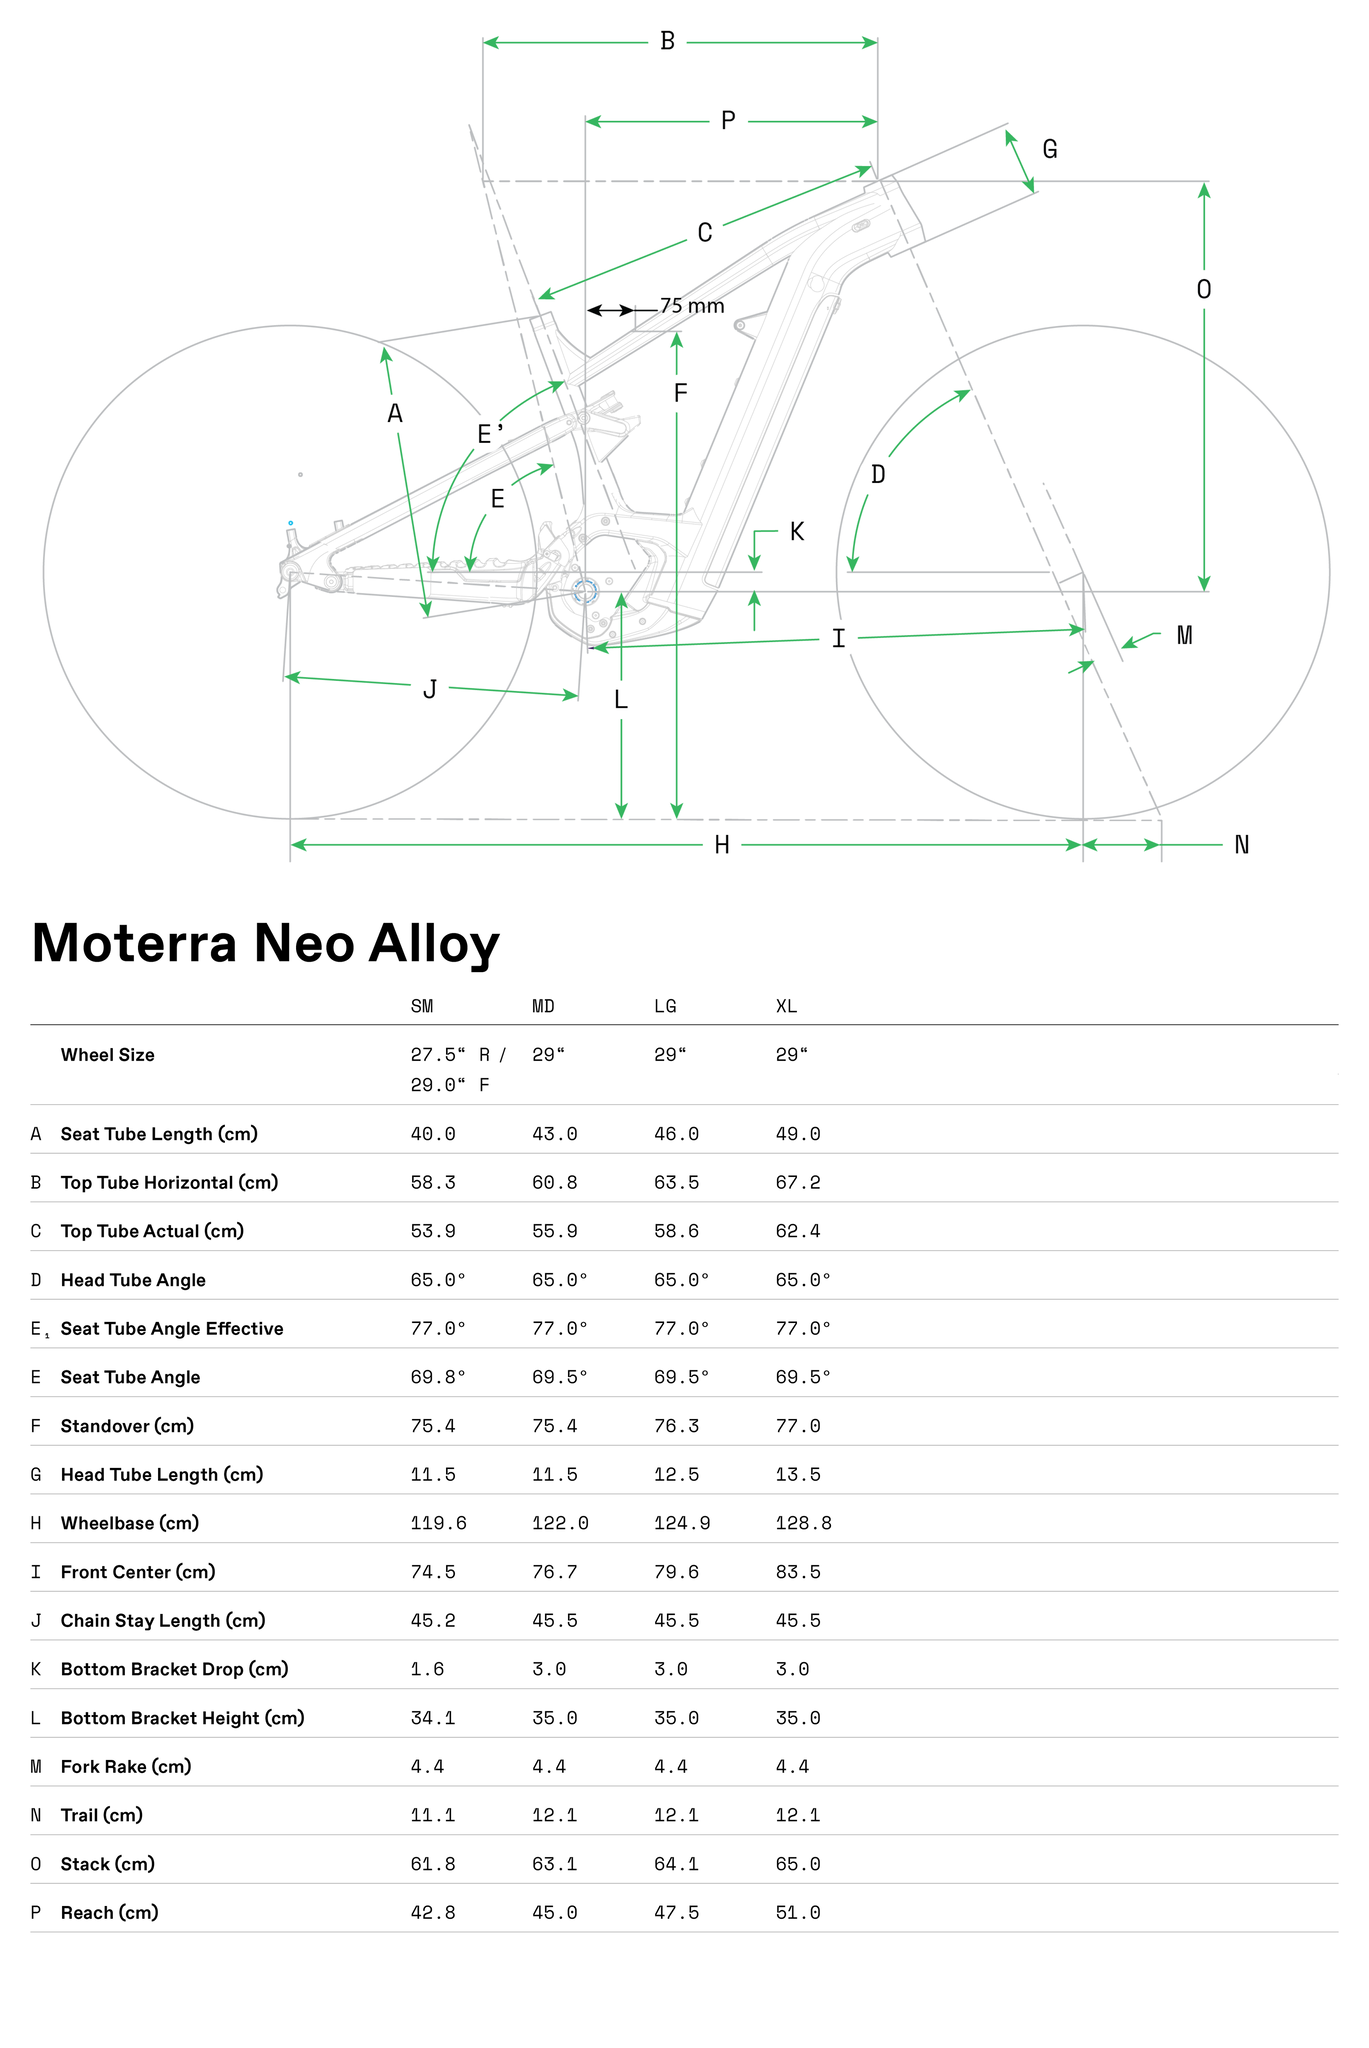 Cannondale Moterra Neo Alloy Geometry Chart